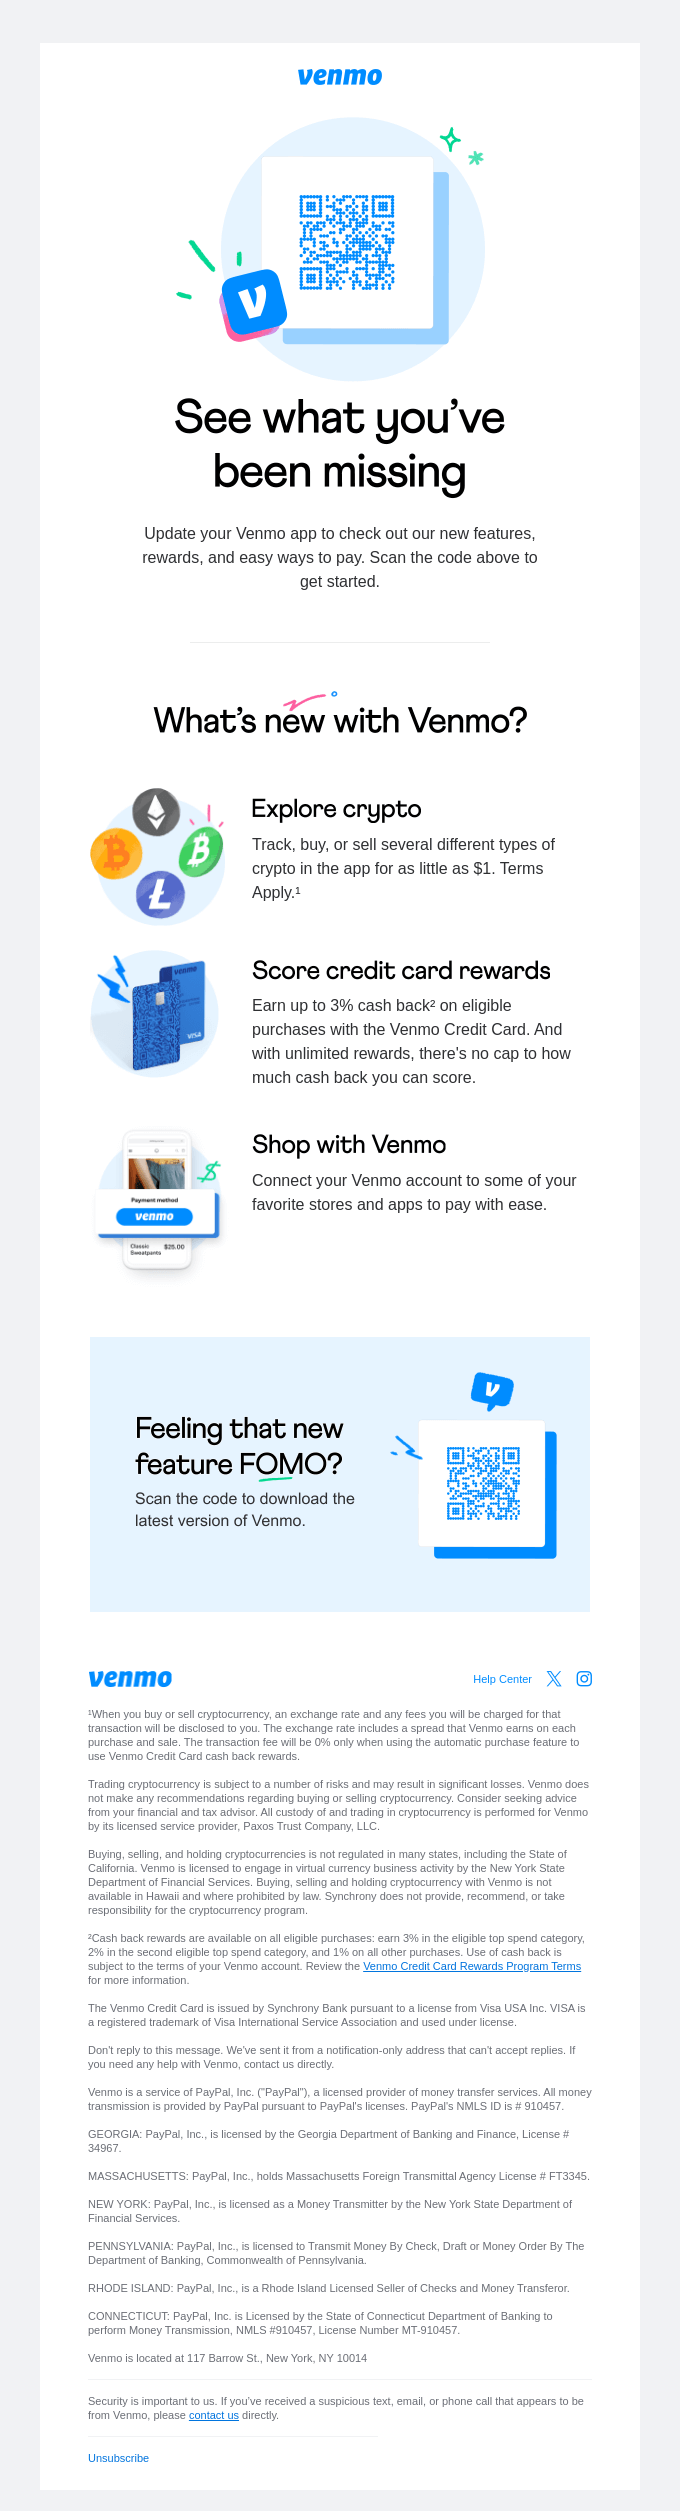 Don’t miss out on the best of Venmo